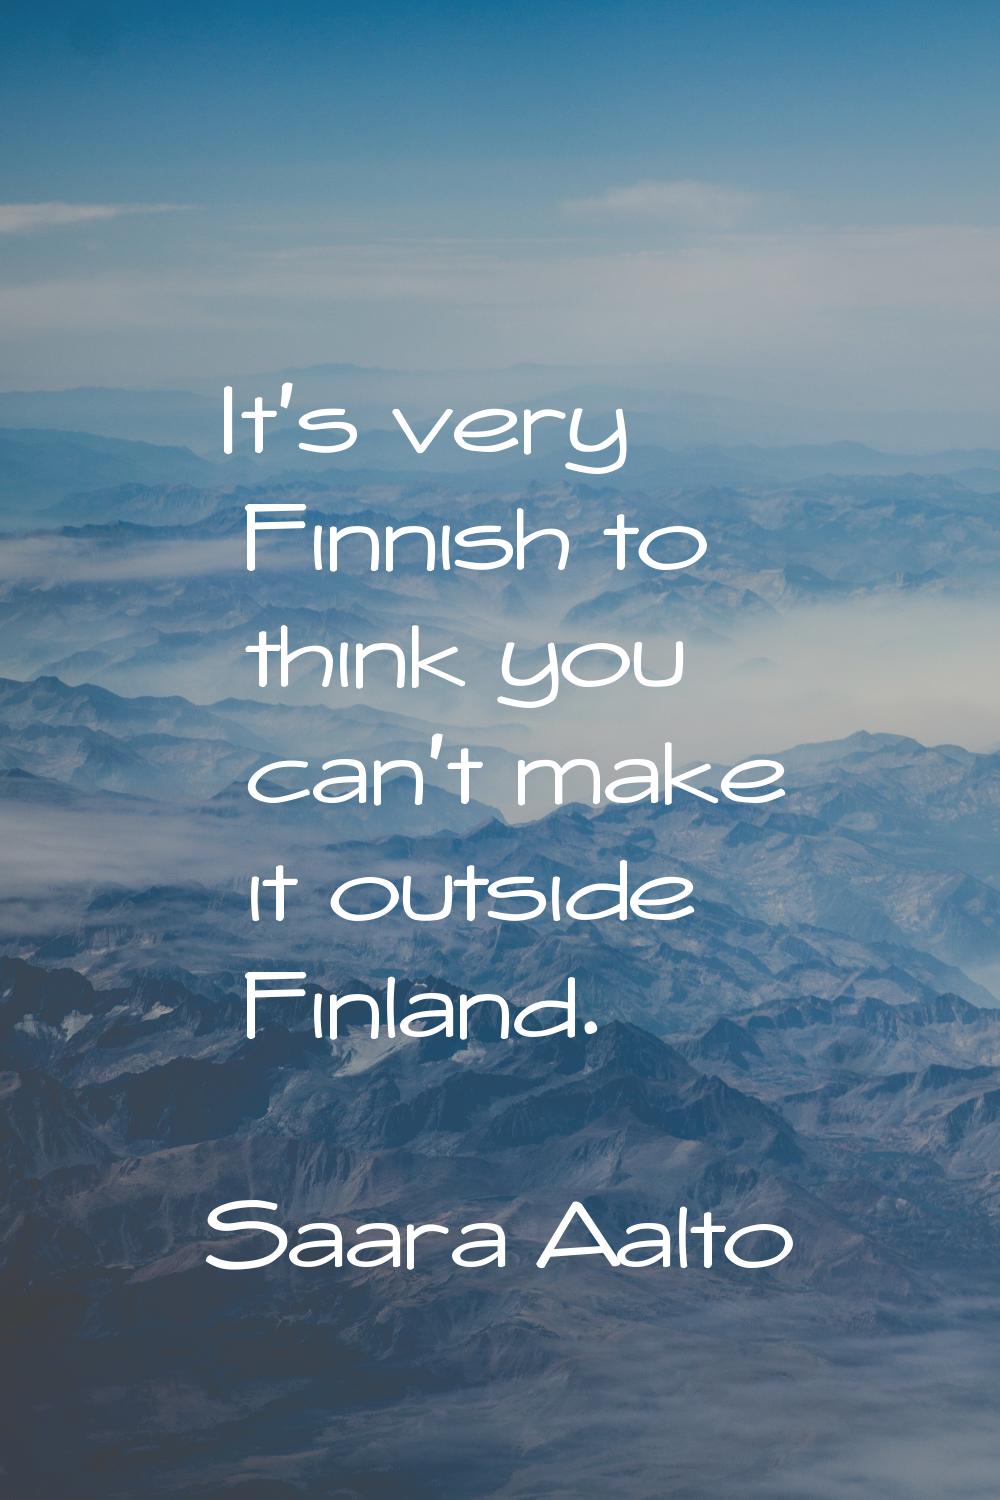 It's very Finnish to think you can't make it outside Finland.